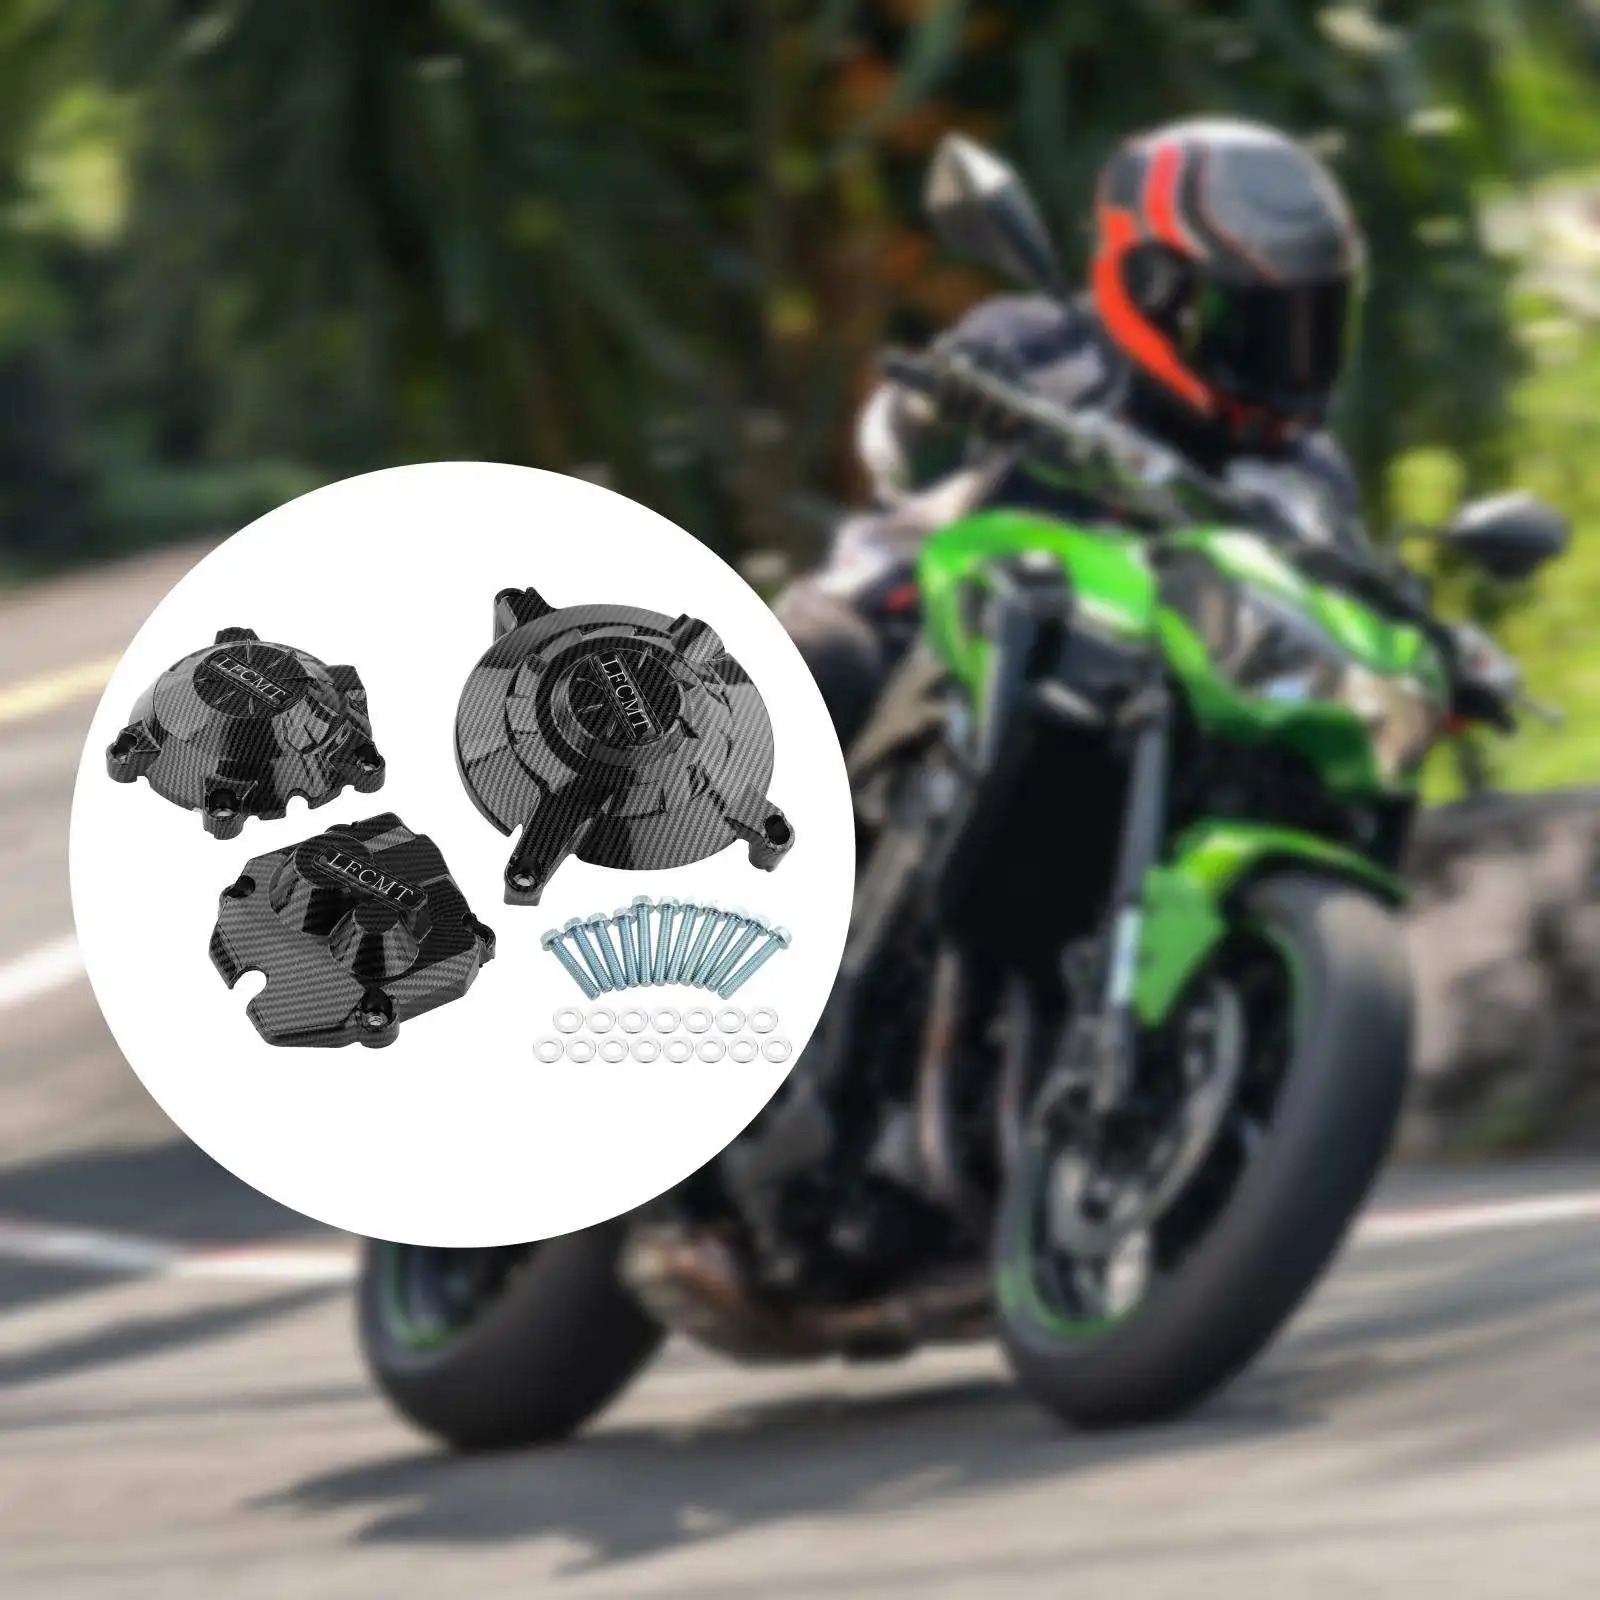 Secondary Engine Protective Covers Set Engine Black Guard Crankcase Protector Cover Fits for Kawasaki Ninja ZX10R 2011-2019